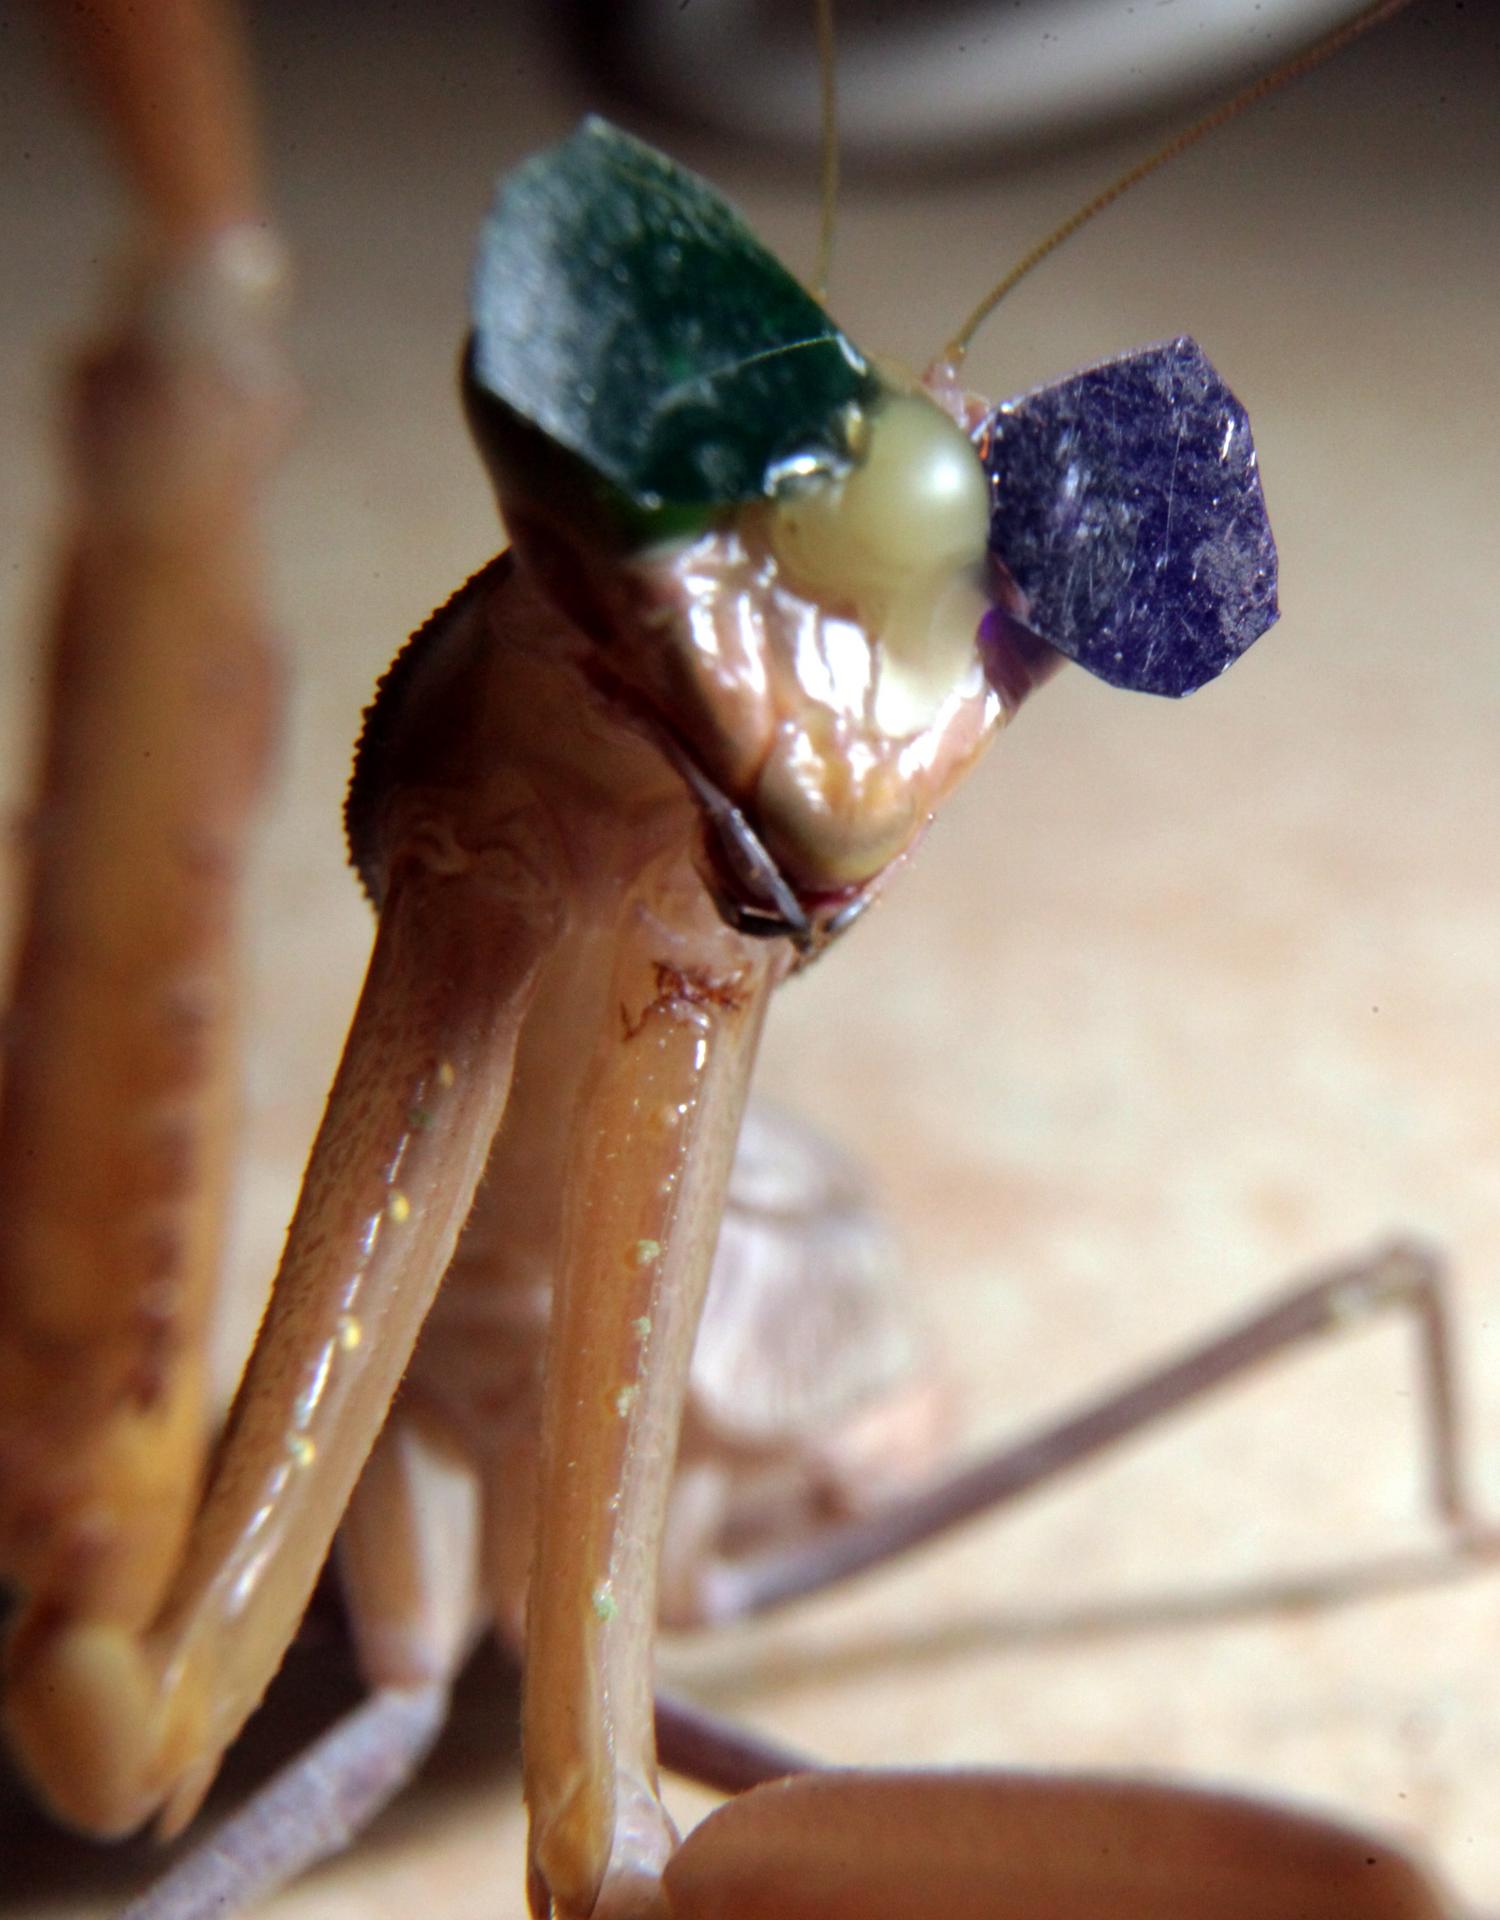 Insect with 3D glasses